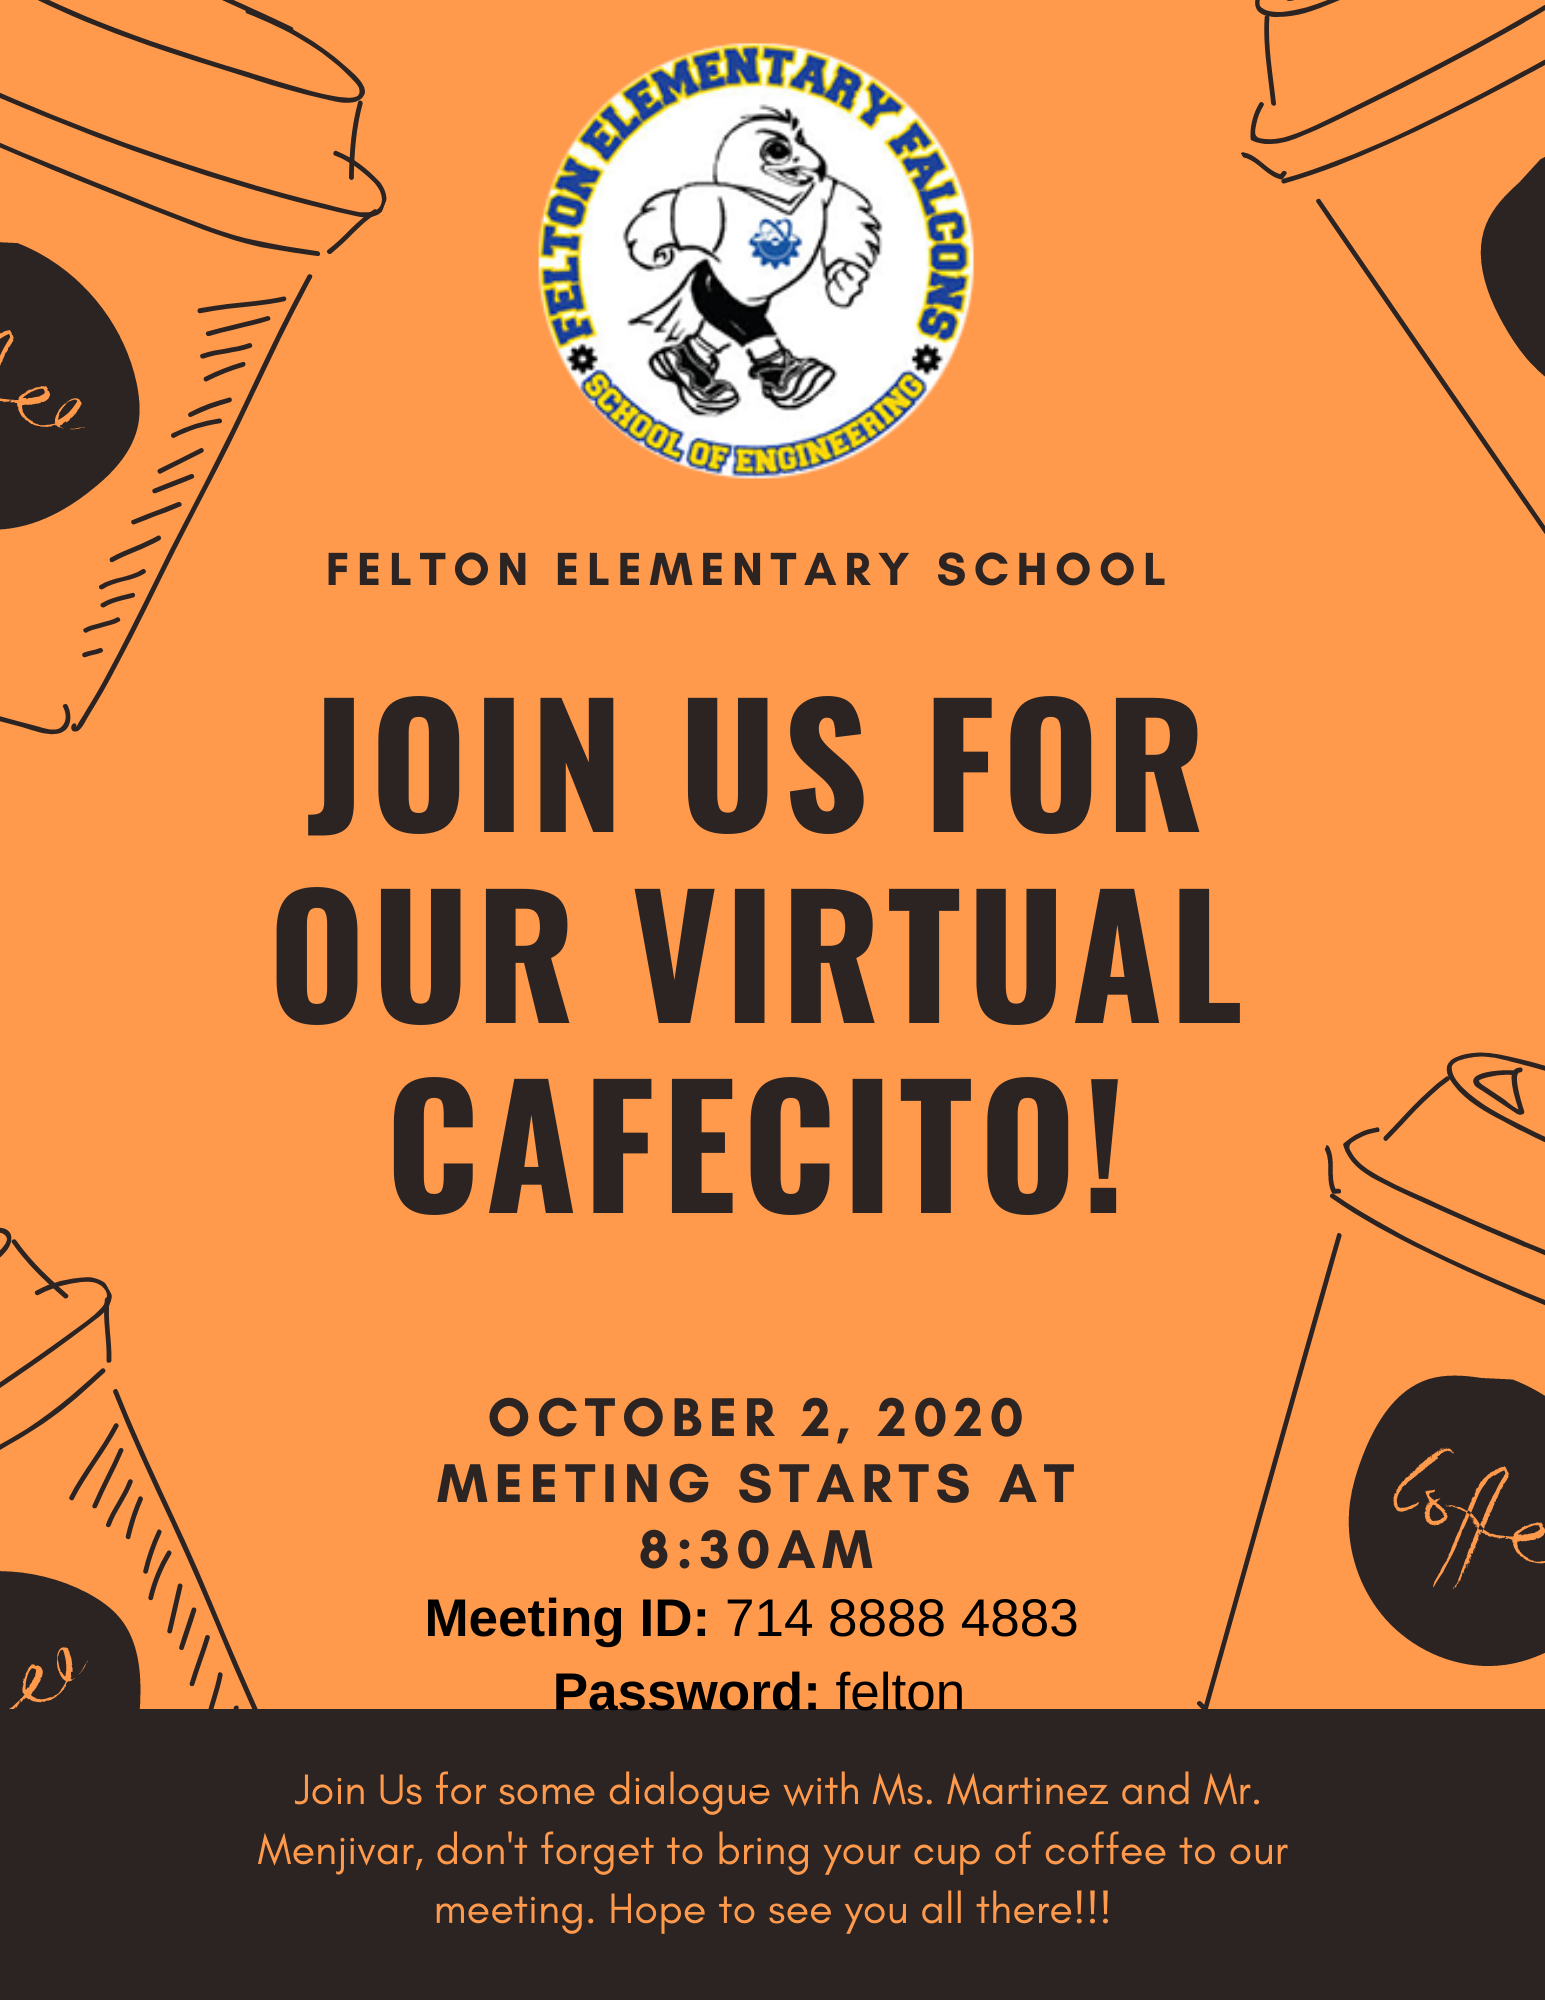 Flyer announcement for Cafecito with the principal meeting